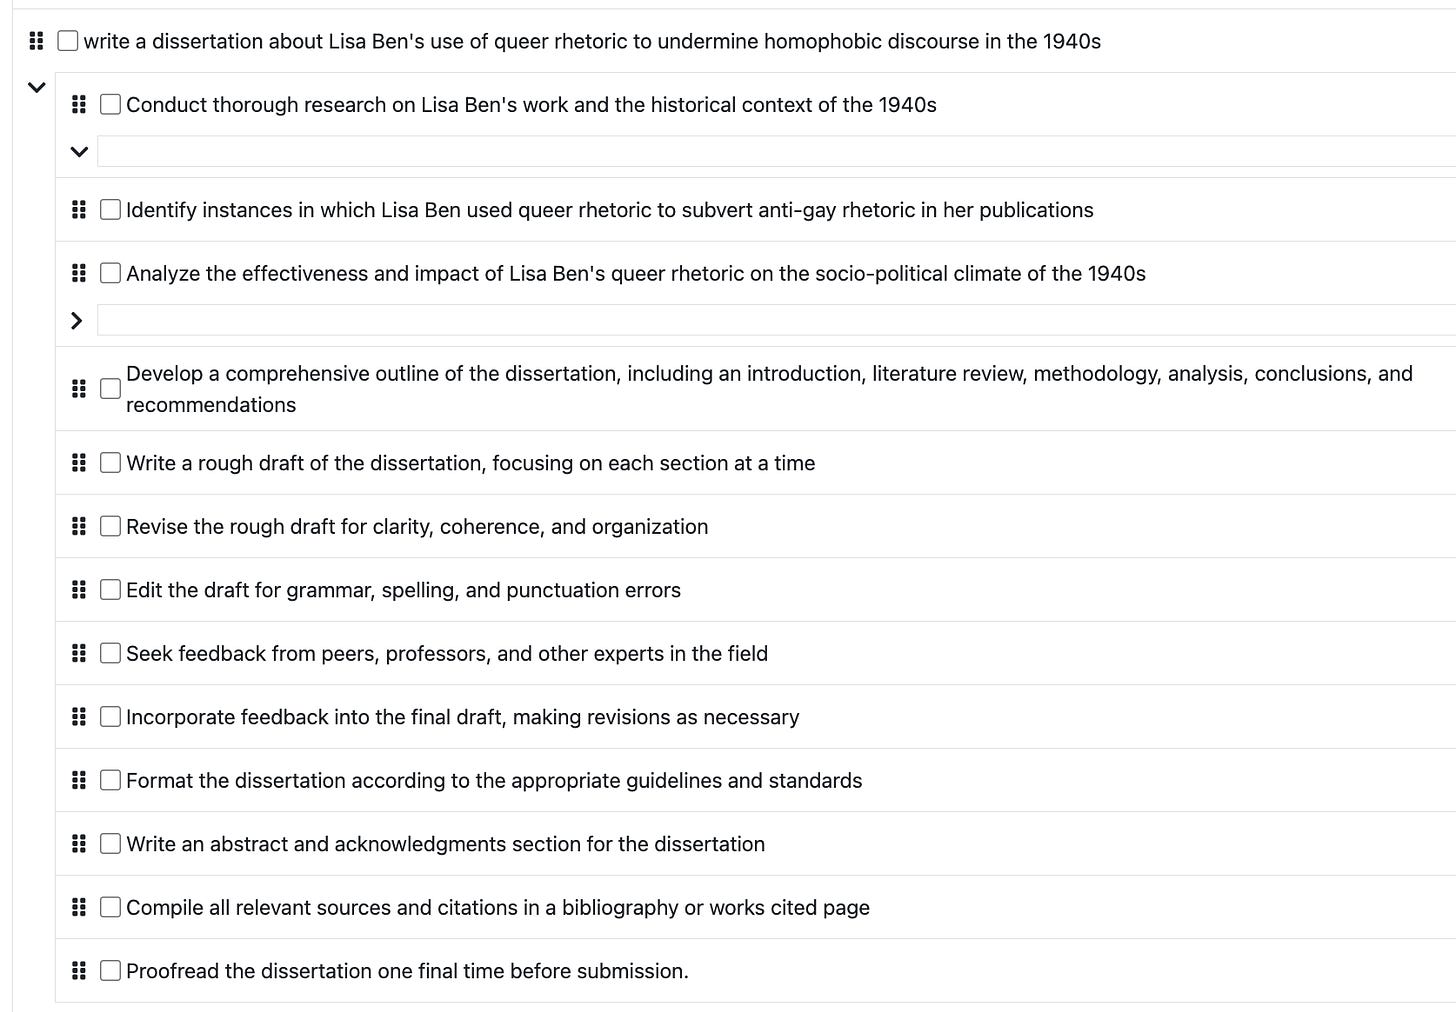 A further breakdown of my dissertation topic into tasks, courtesy of Goblin.Tools. Tasks include "Conduct through research on Lisa Ben's work and the historical context of the 1940s"